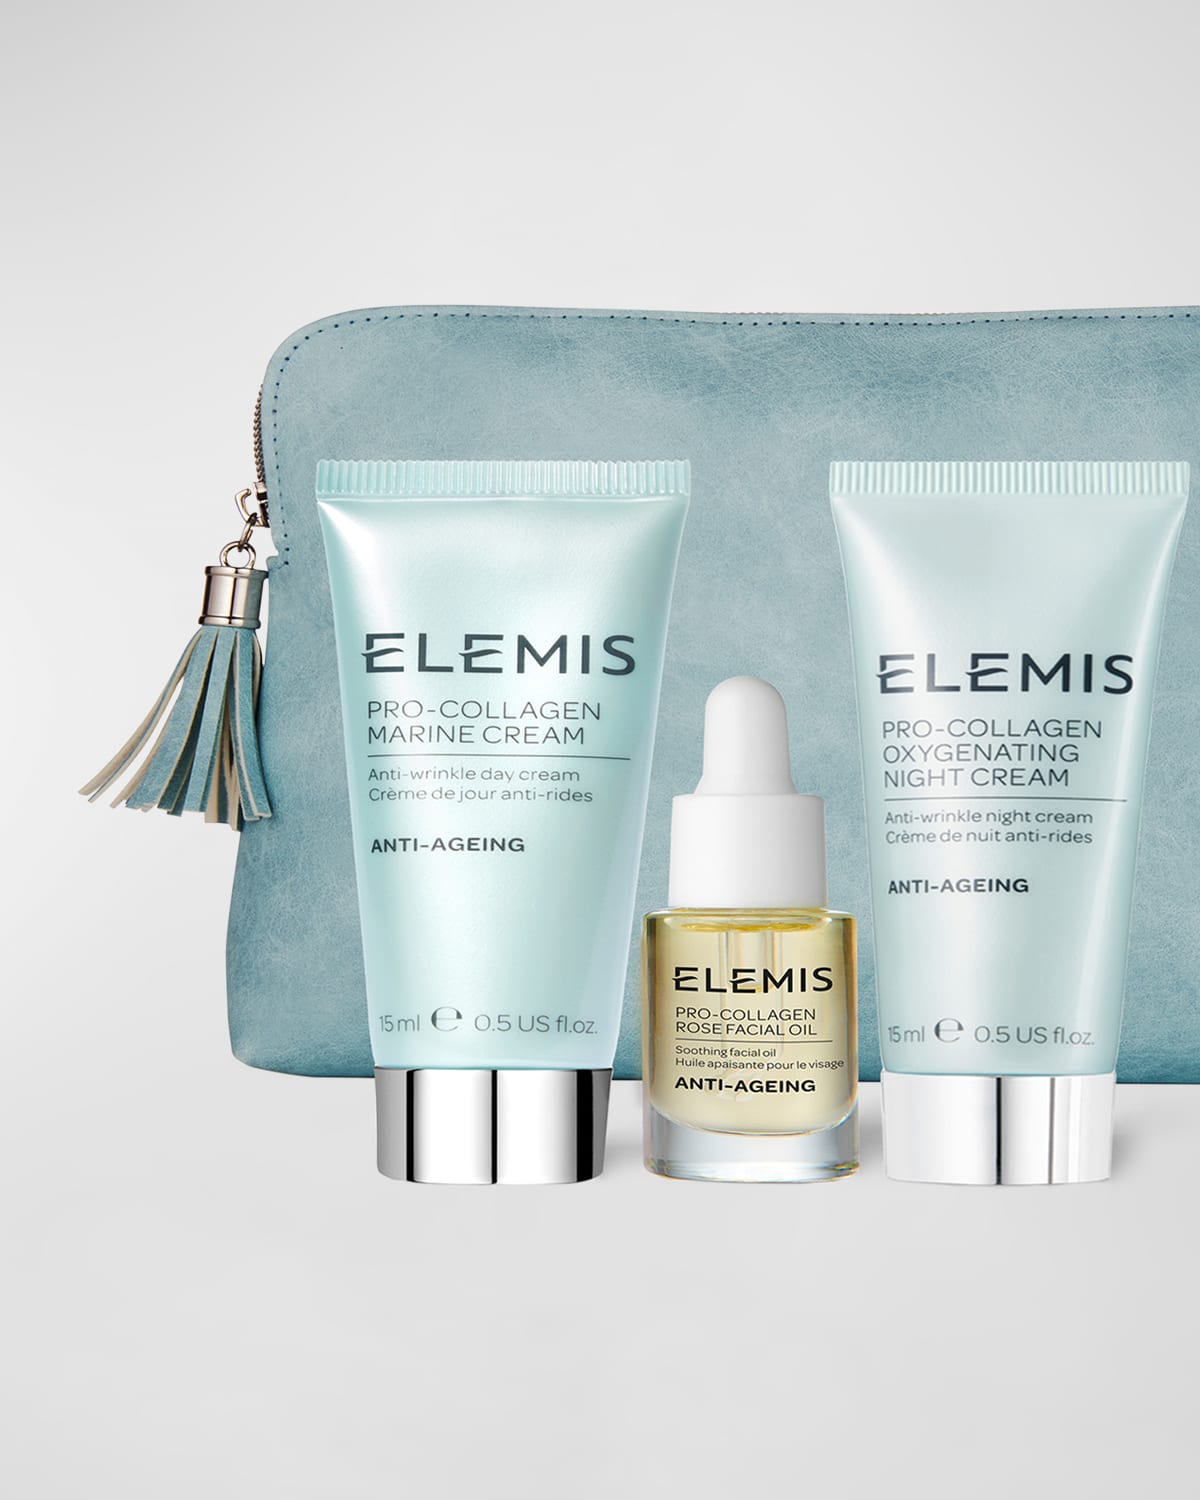 Pro-Collagen Smoothing Set, Yours with any $95 ELEMIS Purchase